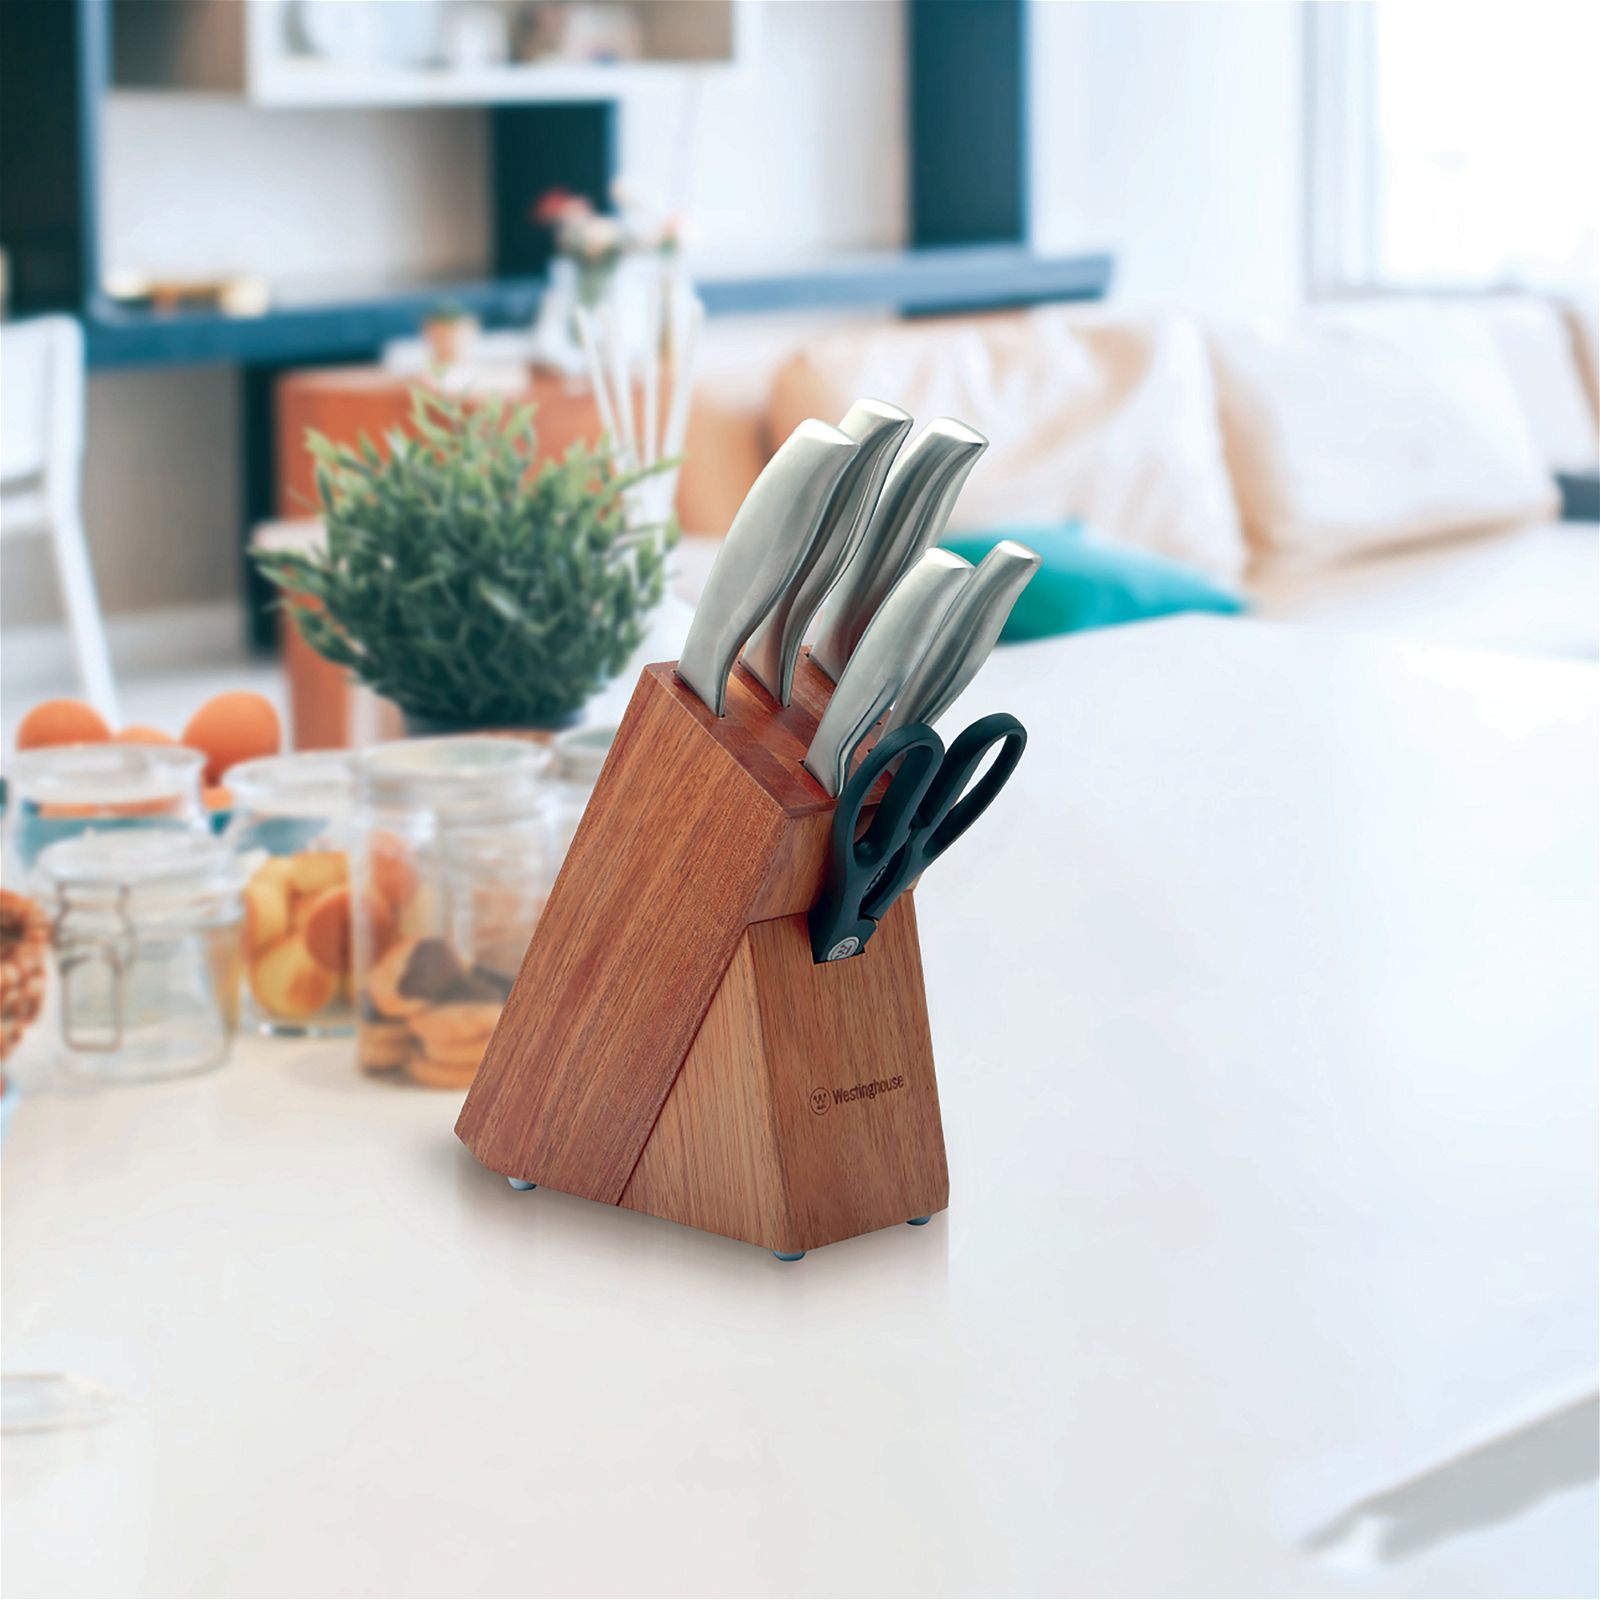 Westinghouse 7 Piece Knife Block Set Acacia Wood-#product_category#- Distributed by: RVM under license